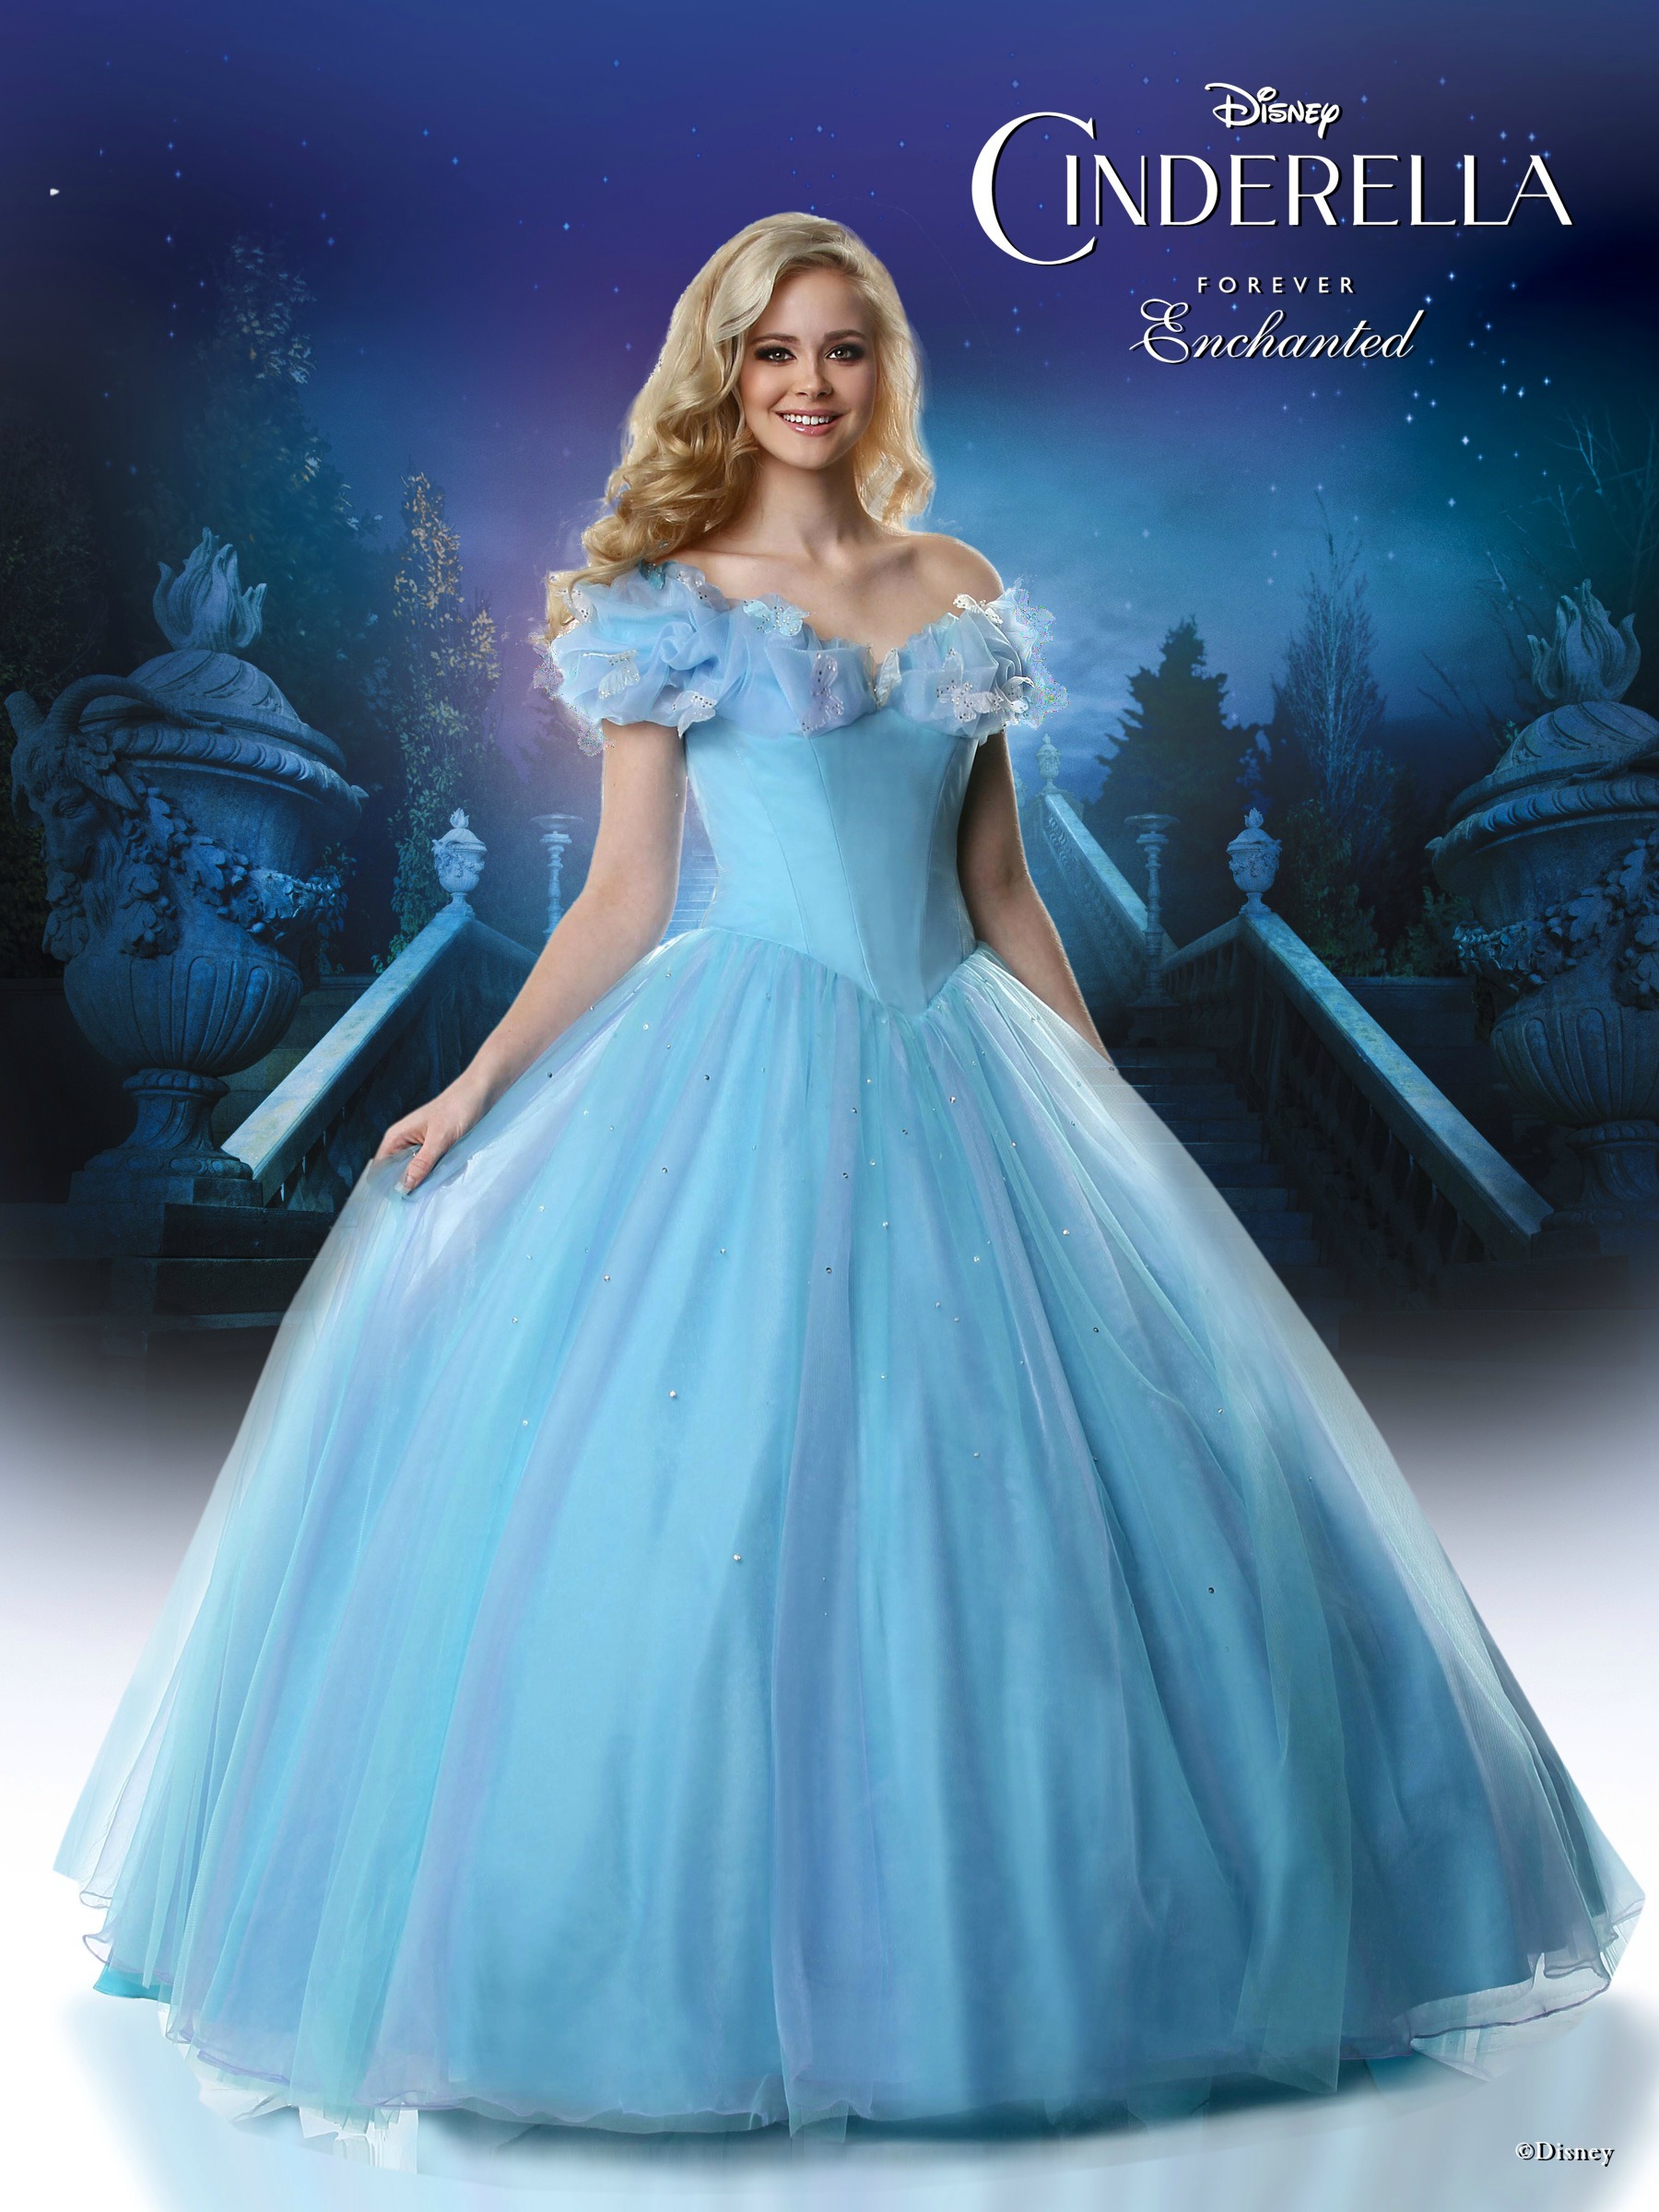  2015 Disney Forever Enchanted Cinderella Dress for Prom Mom Fabulous 1800x2400